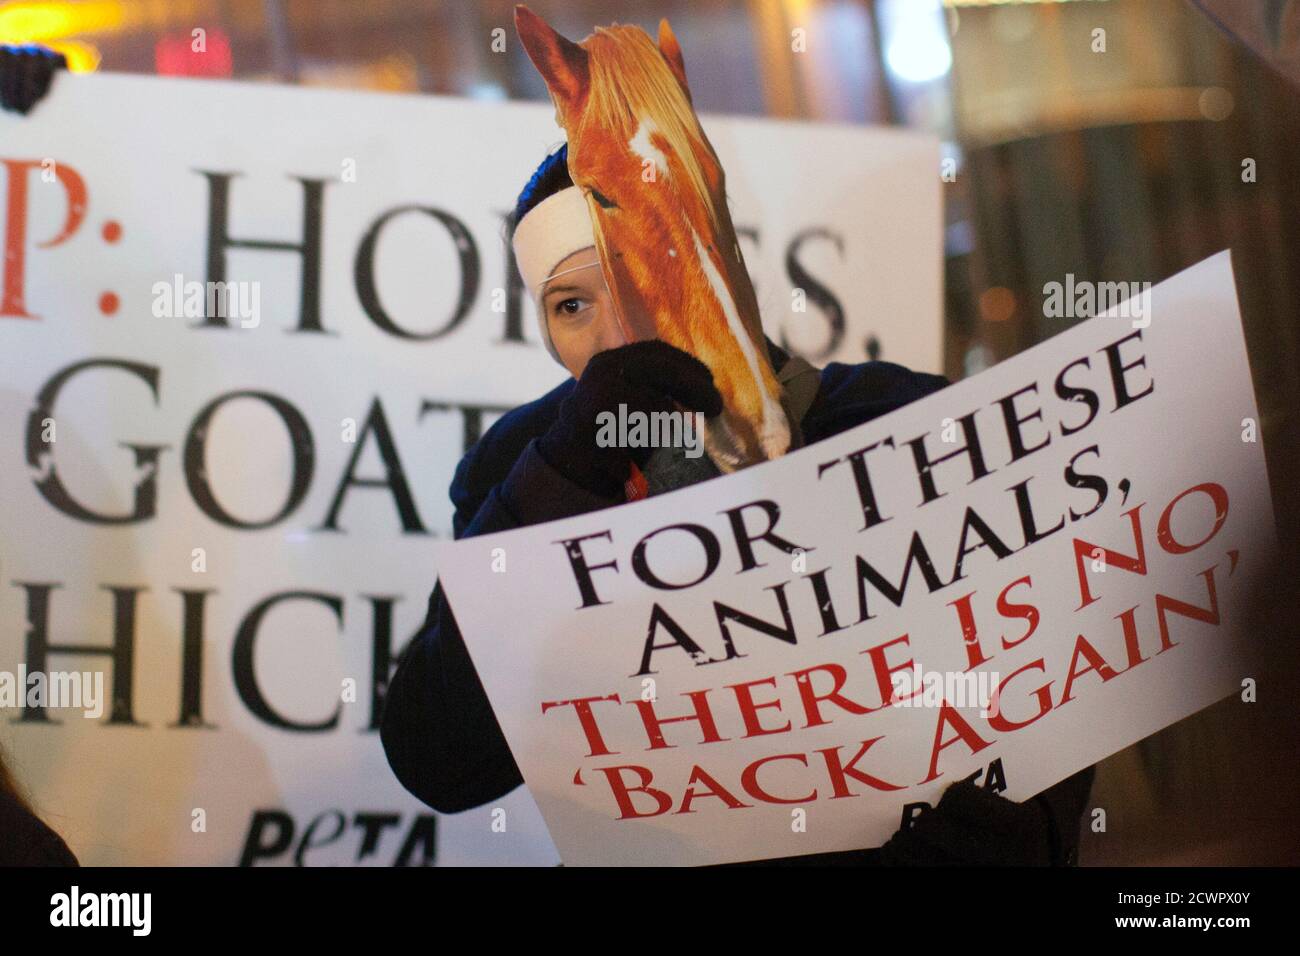 A demonstrator from the animal rights group PETA adjusts a horse mask at a protest at the premiere of the film 'The Hobbit: An Unexpected Journey' in New York December 6, 2012. The group claims that numerous animals suffered from fatal injuries during the production of the film. Director Peter Jackson has said some animals died on a farm where they were housed, but none had been hurt during filming.  REUTERS/Andrew Kelly (UNITED STATES - Tags: ENTERTAINMENT CIVIL UNREST ANIMALS) Stock Photo